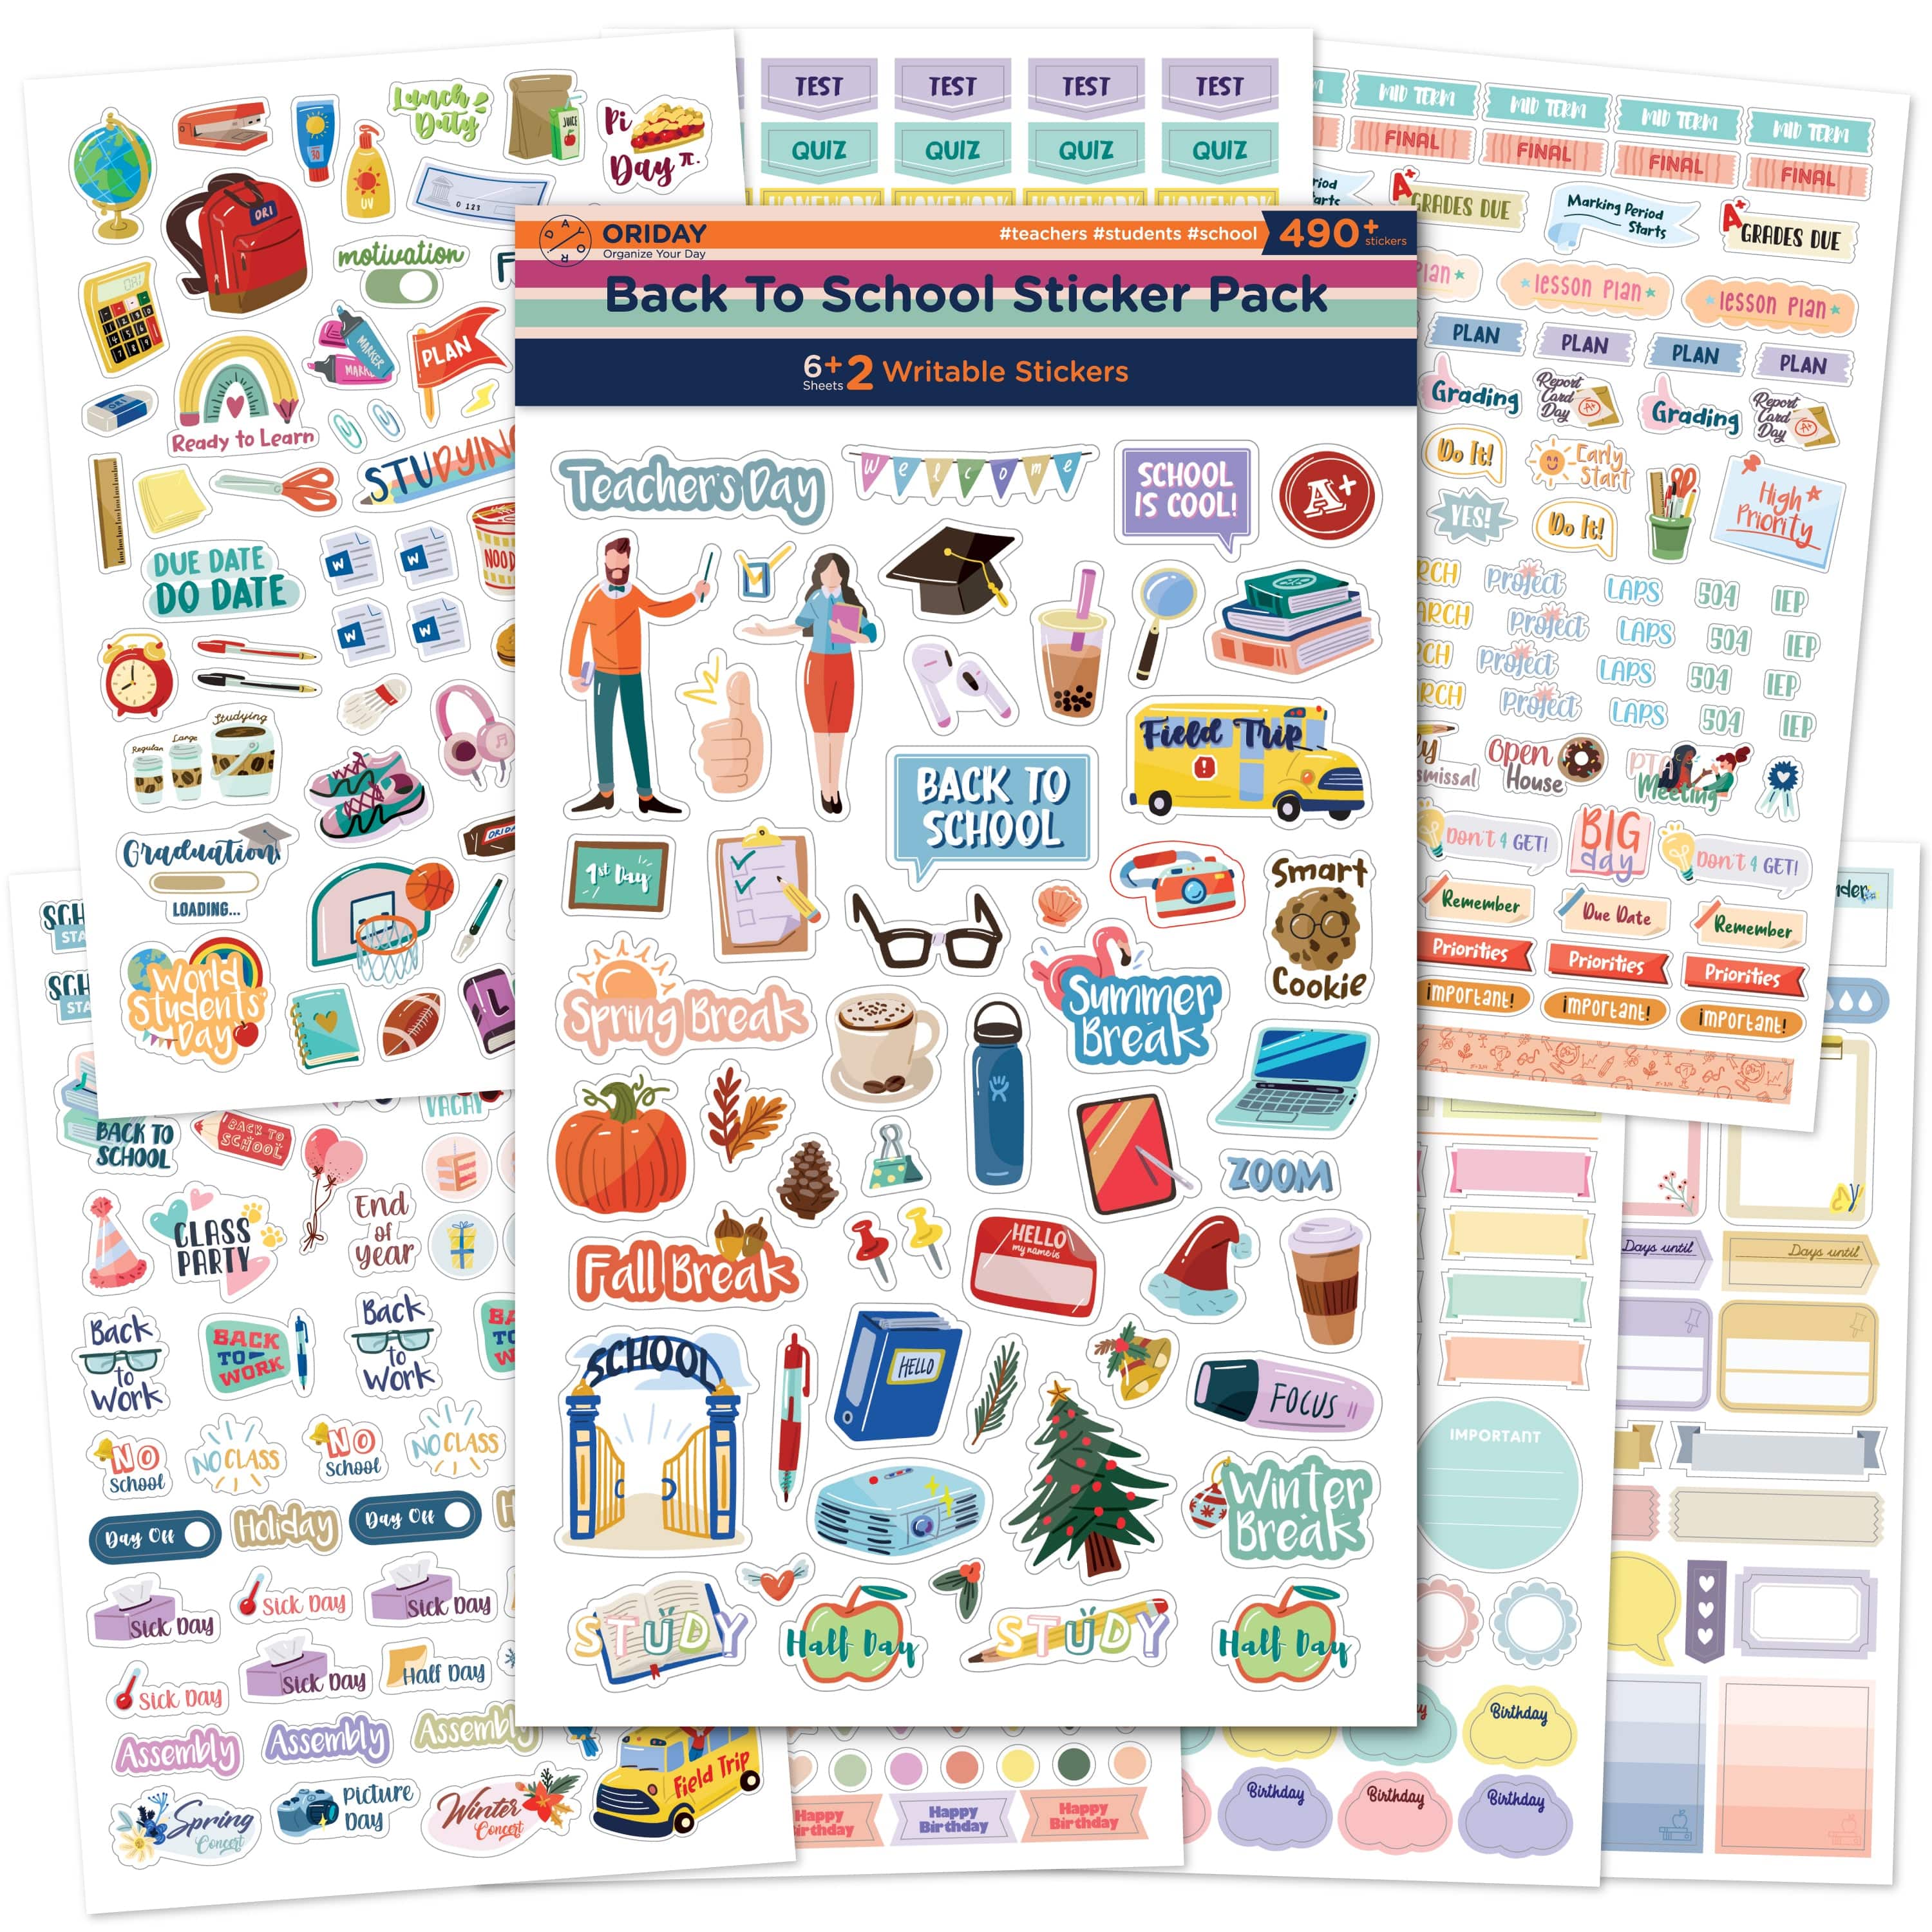 Oriday | New Daily Planner Sticker Pack - 500+ Stickers, Perfect size, Premium Design & Materials